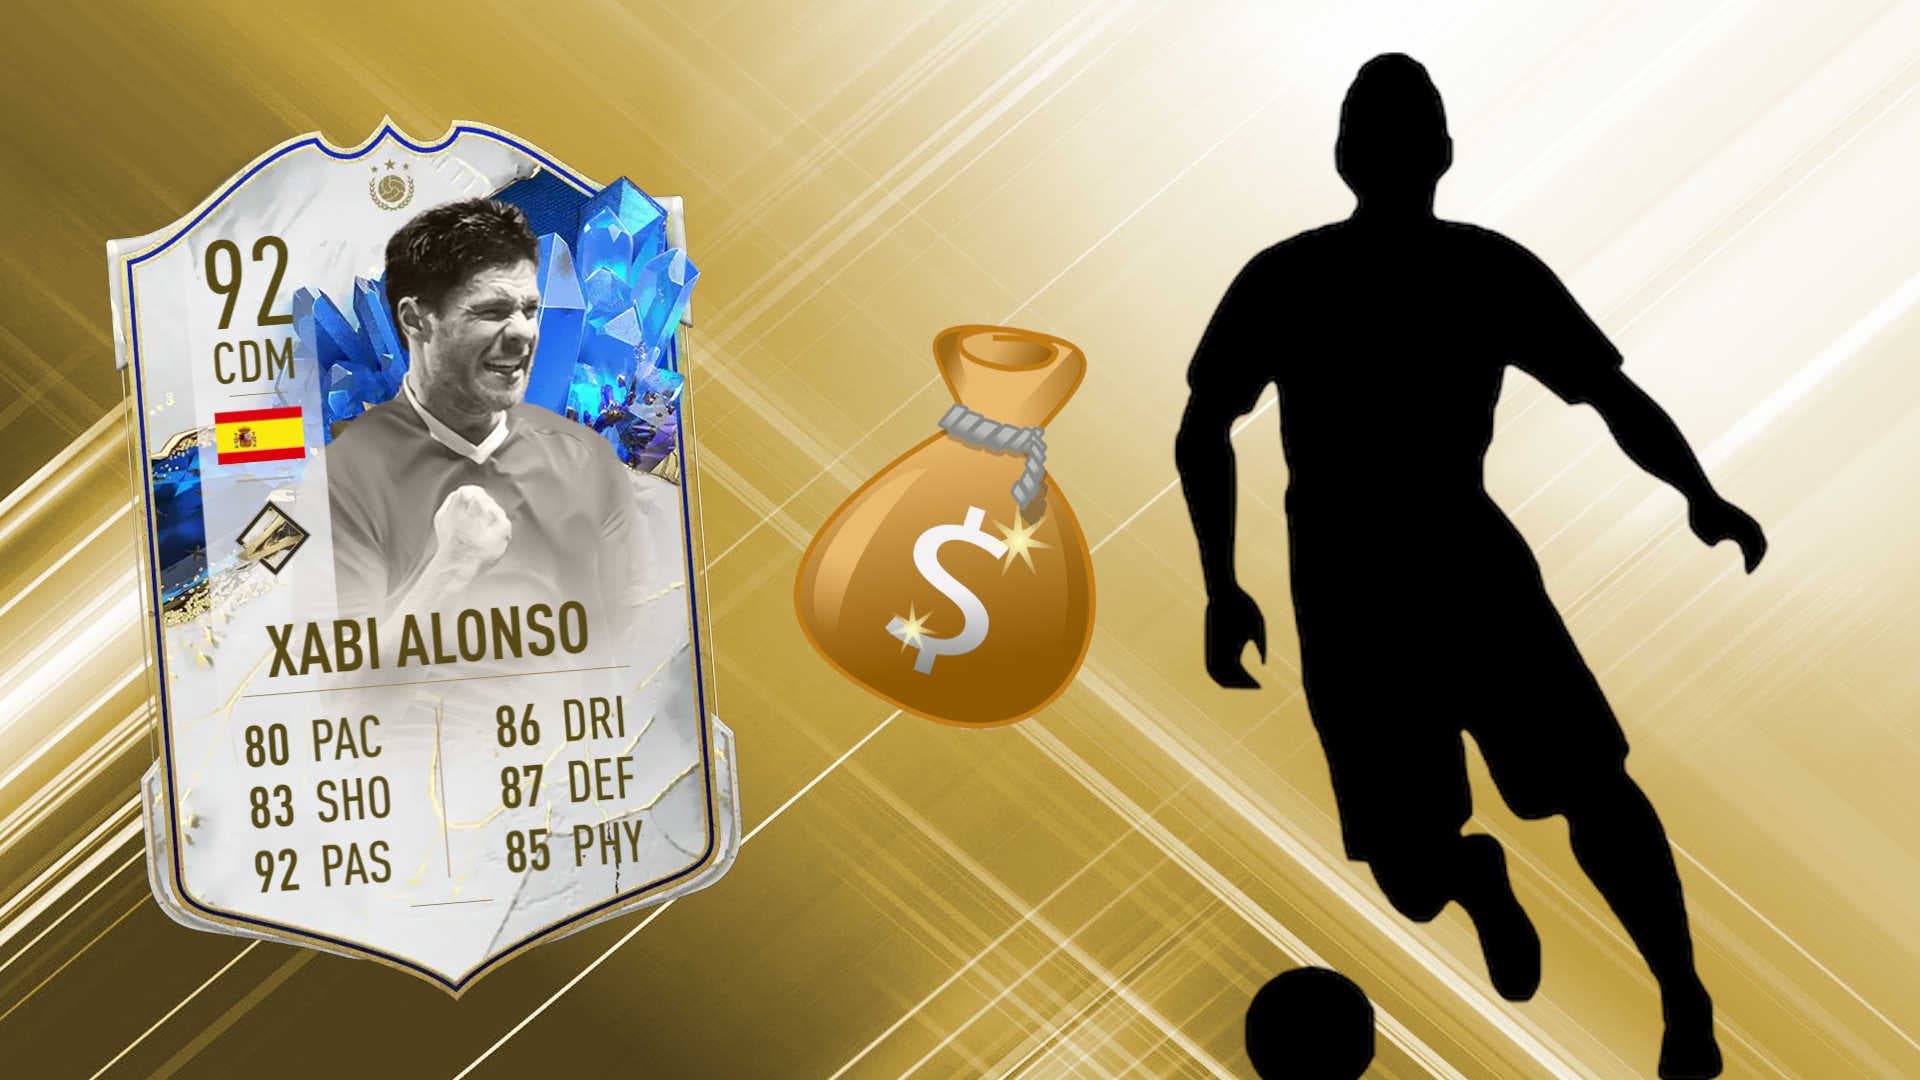 FIFA 23: this midfielder is a kind of low-cost TOTY icon Xabi Alonso